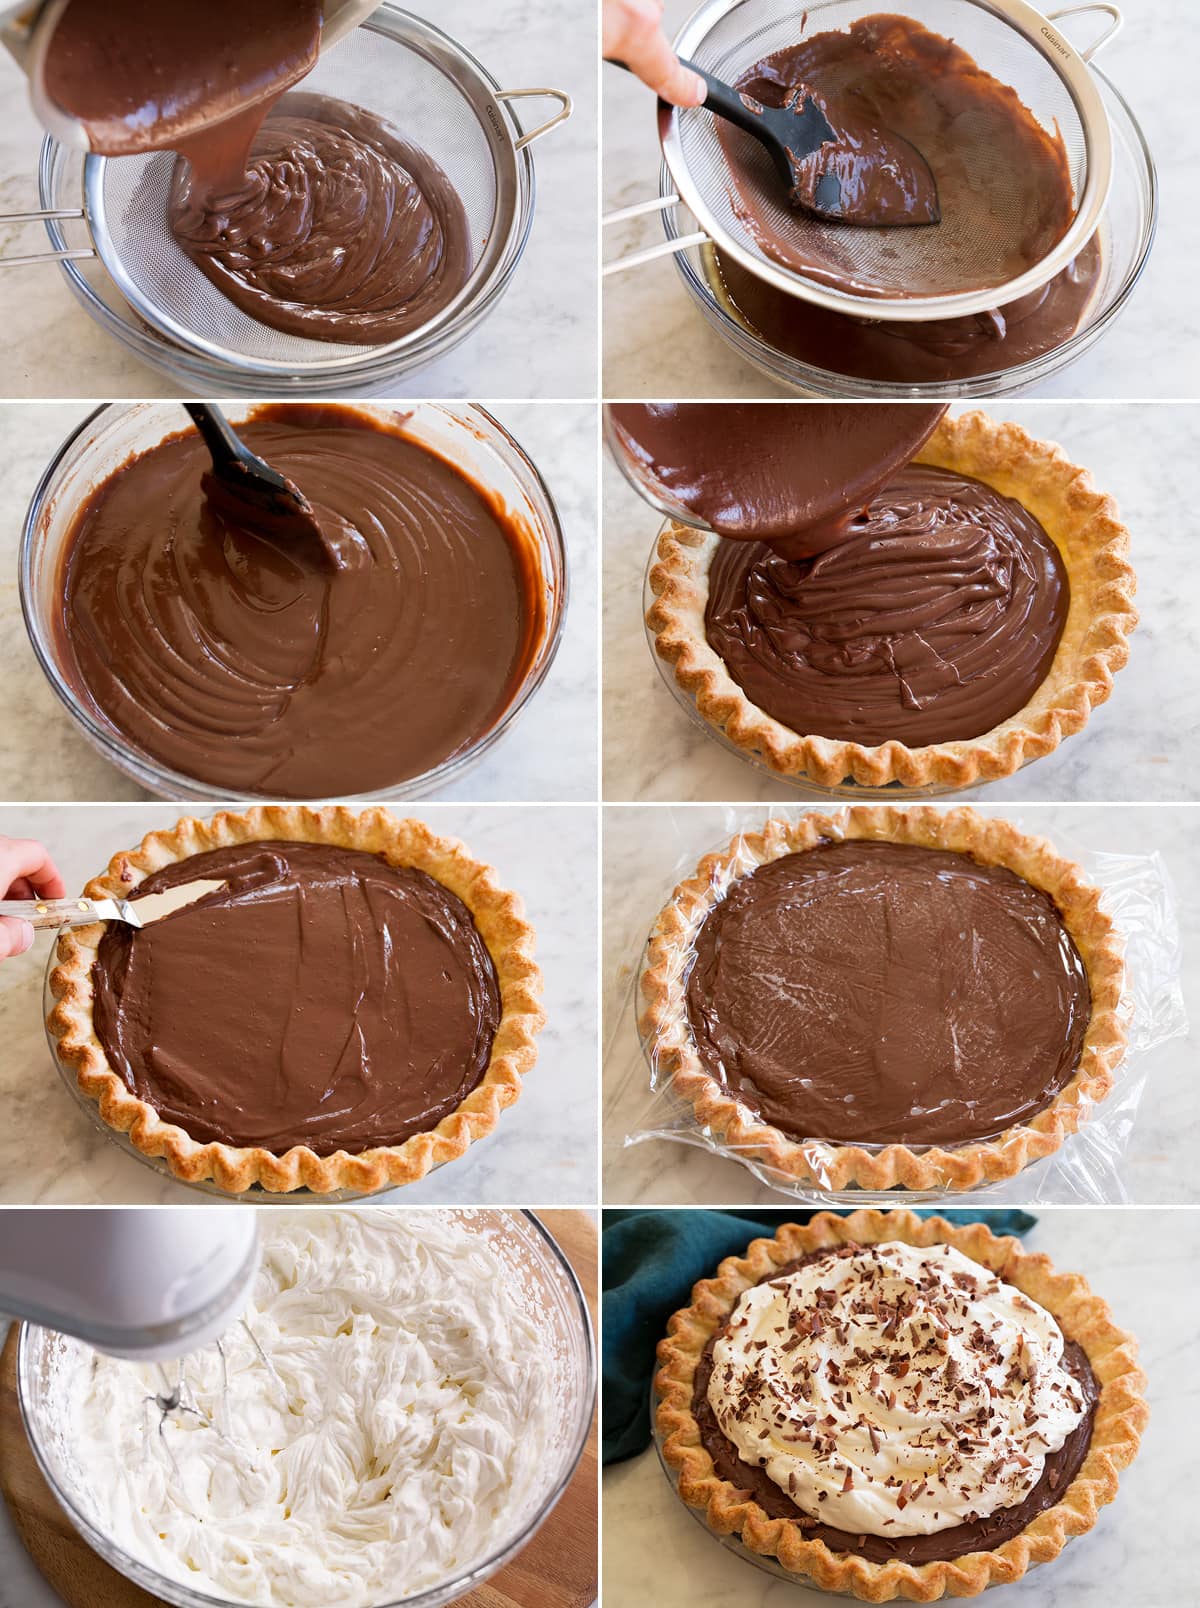 Collage of eight photos showing how to stain pudding mixture for the pie, spread into a baked crust then finish with whipped cream once it's chilled and set.